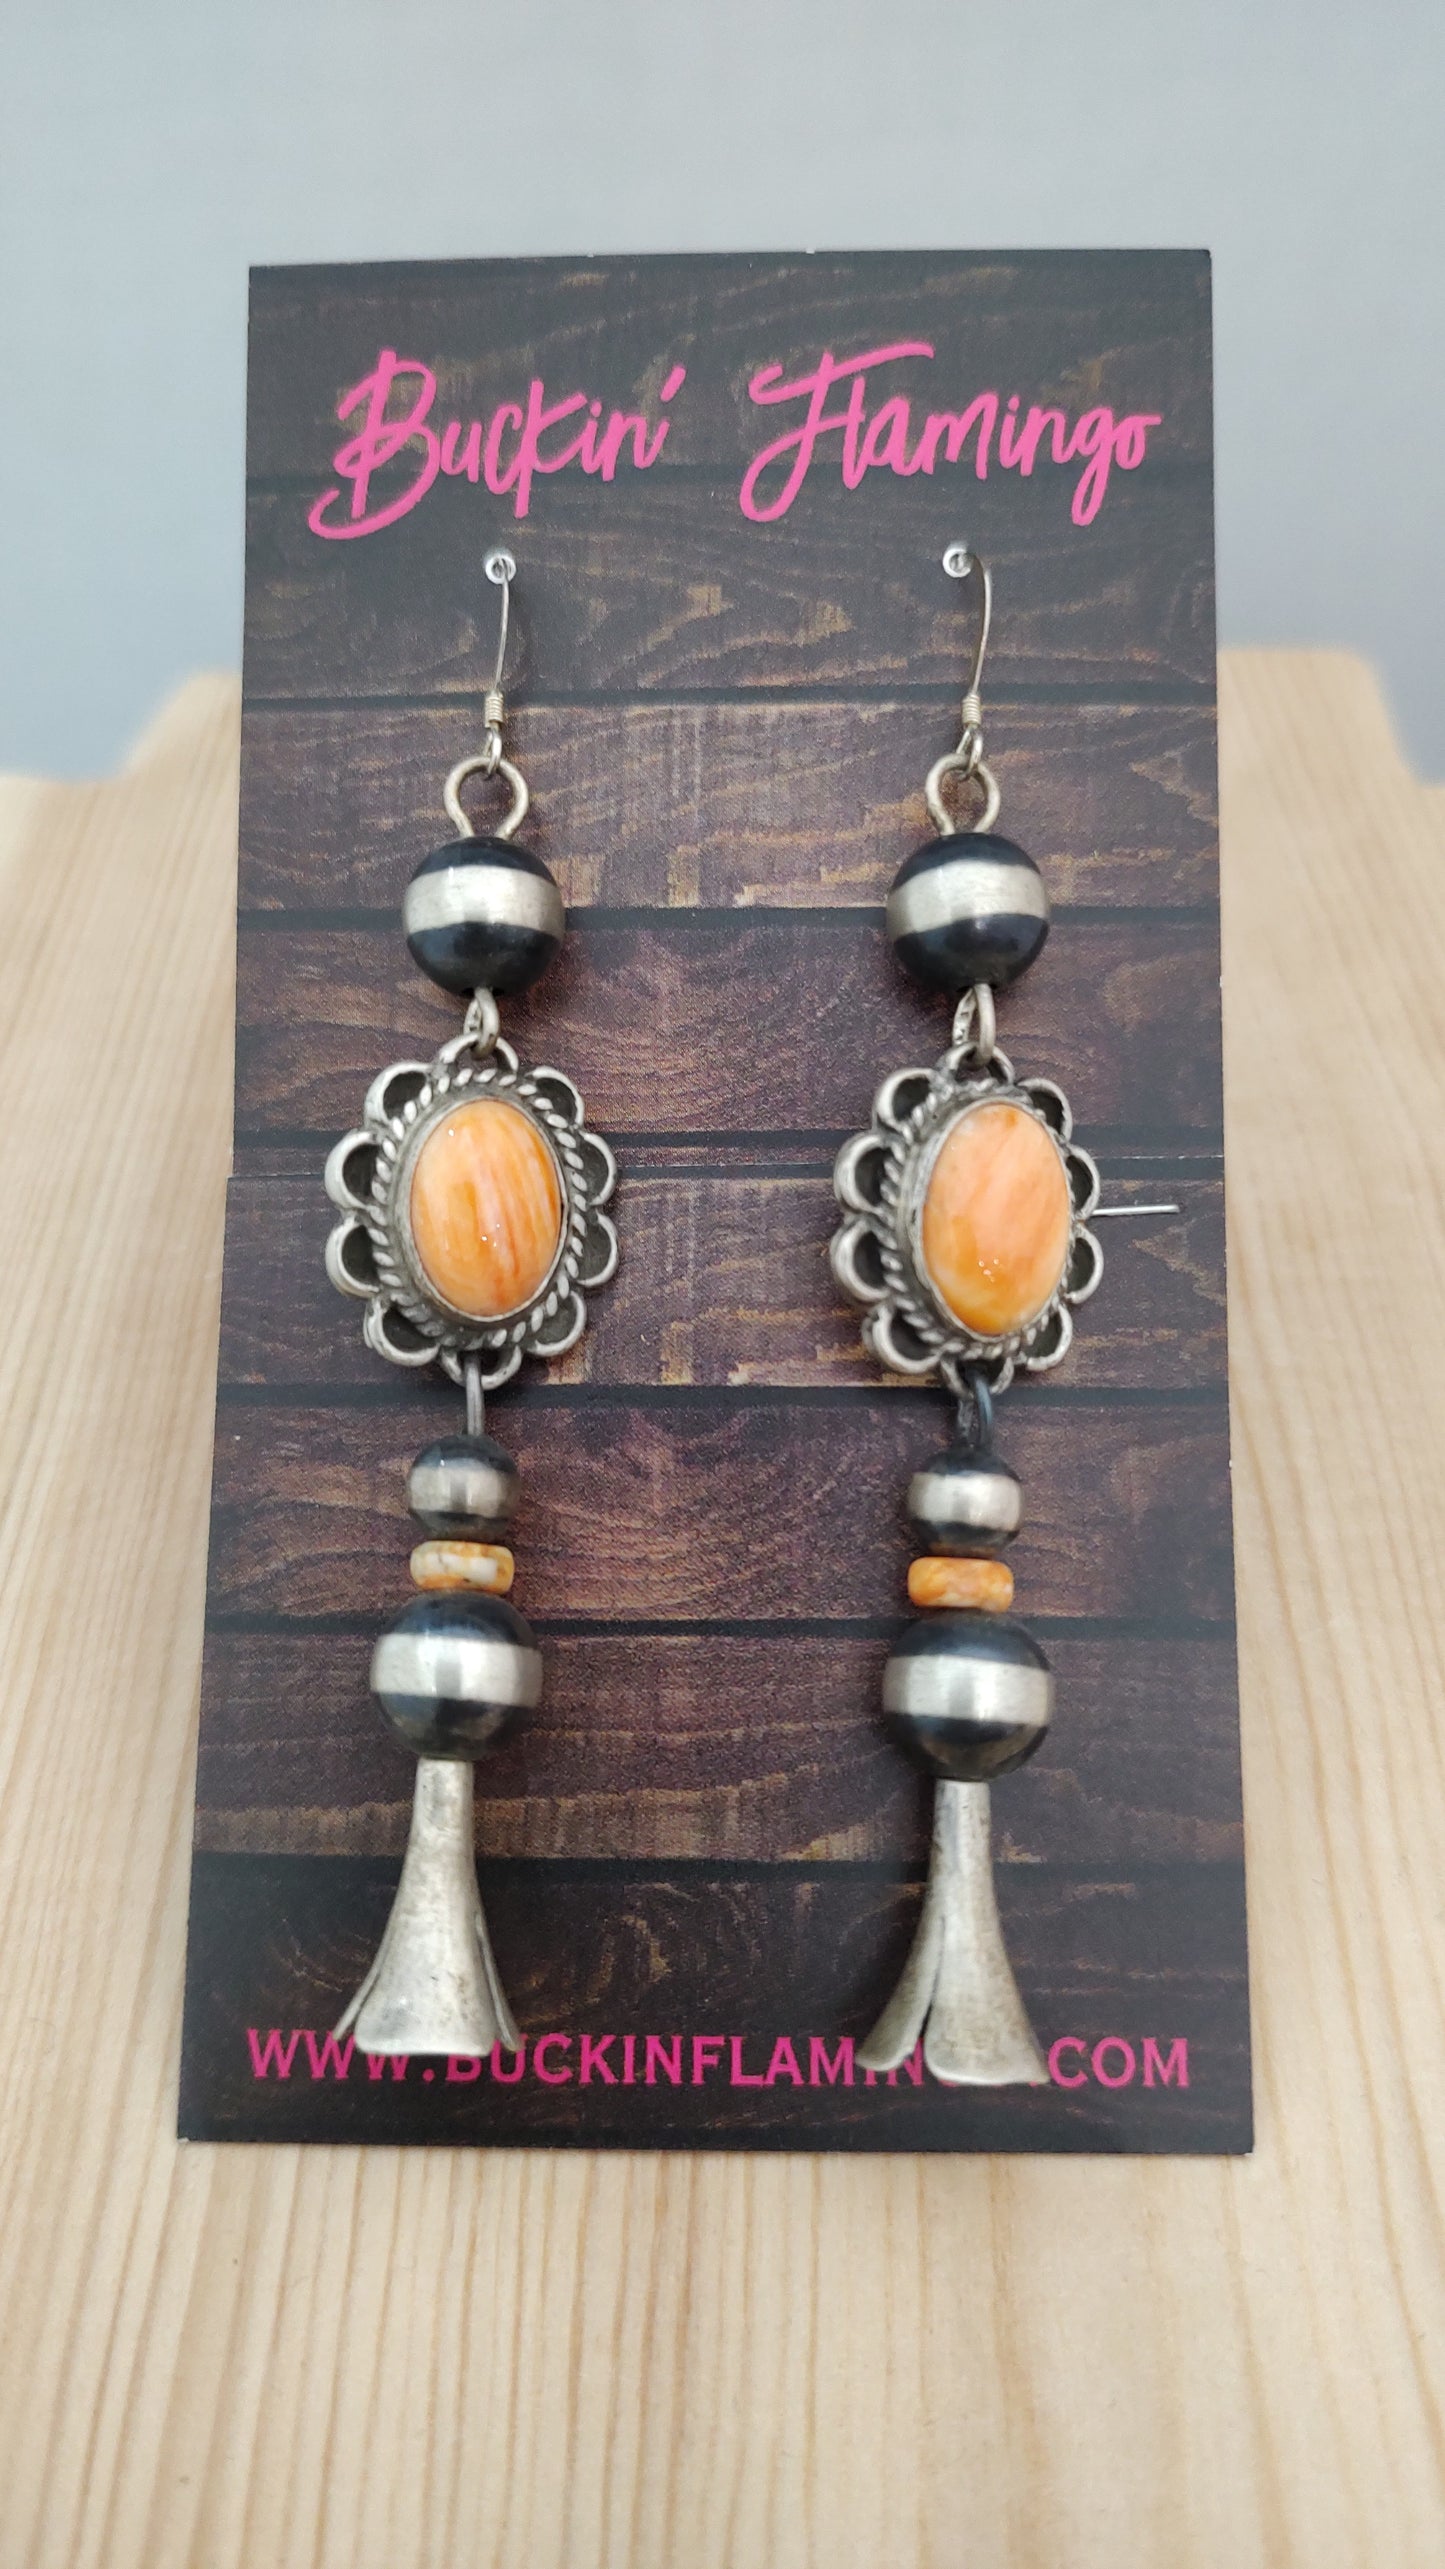 Oval Spiny Oyster with Buckin Pearls and Squash Blossom on Hook Earrings